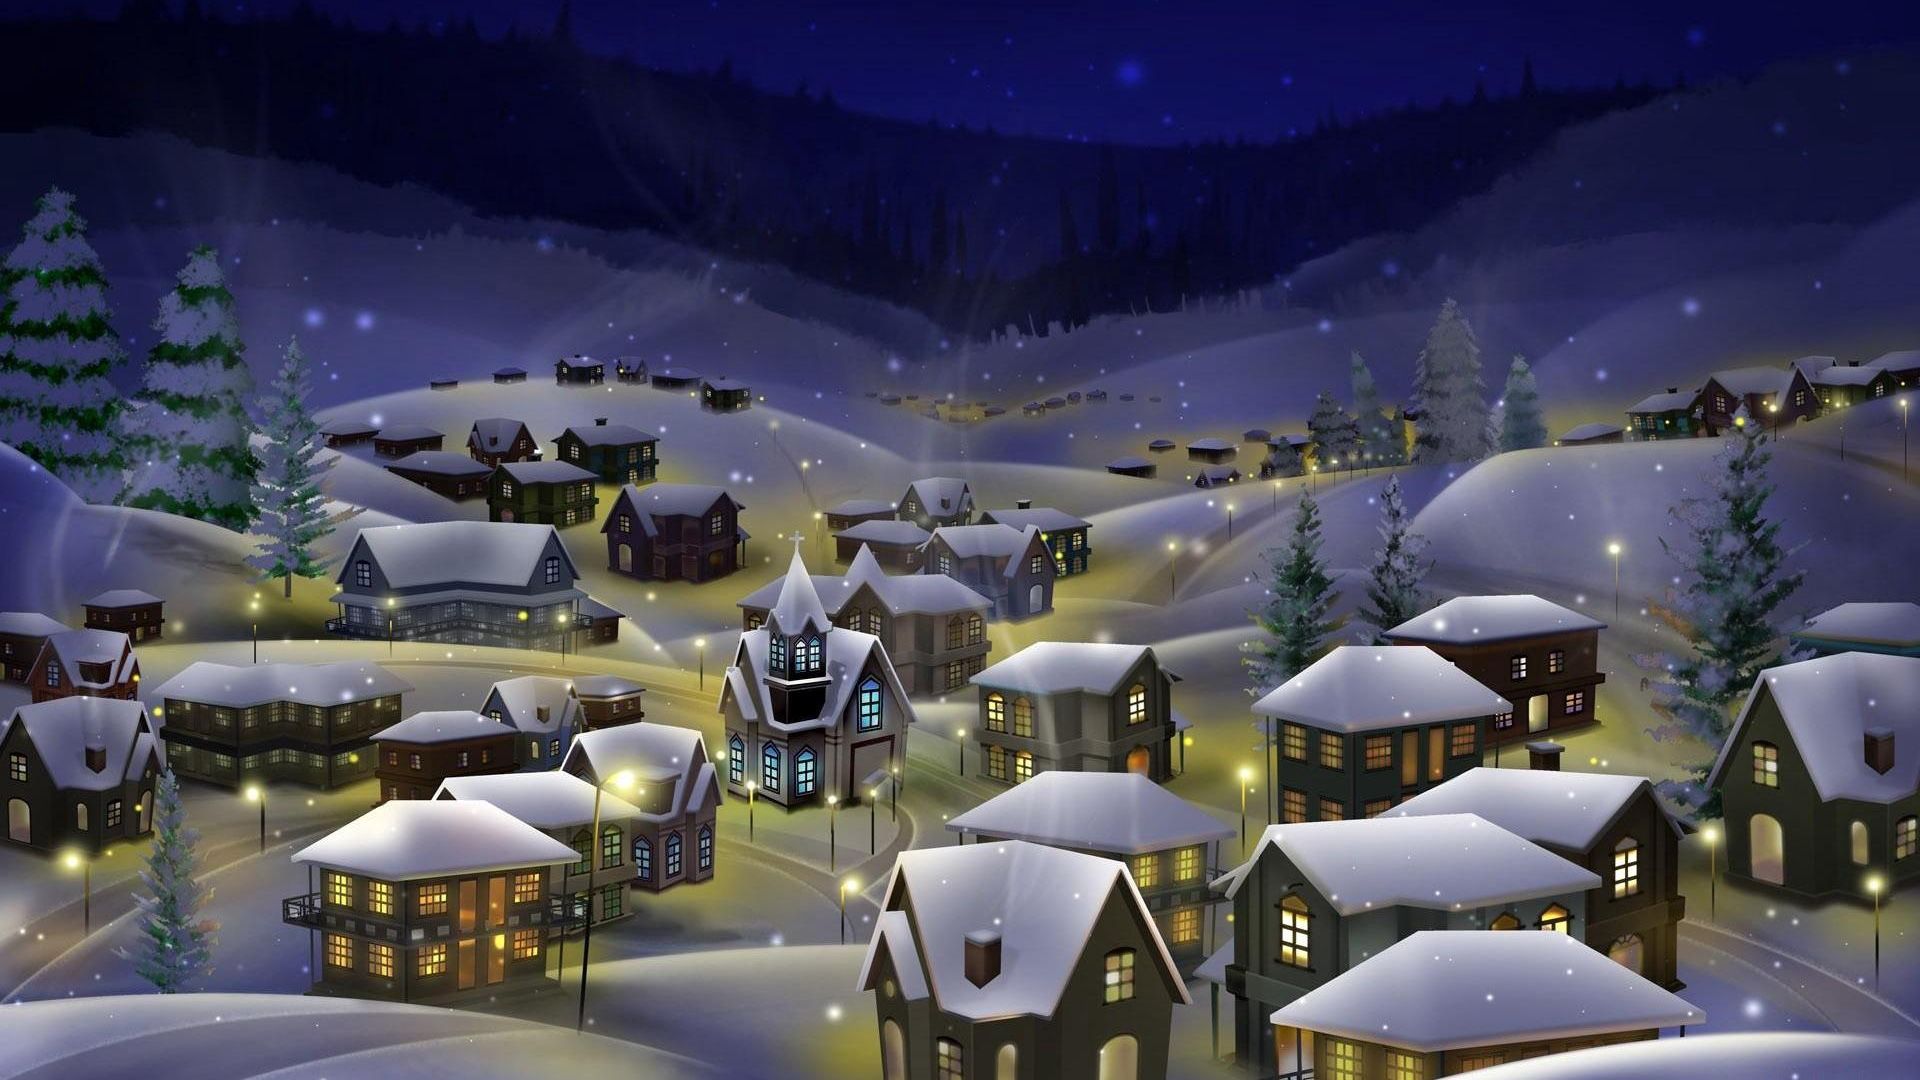 Download wallpaper 1920x1080 night, city, snow, christmas, holiday full hd,  hdtv, fhd, 1080p hd background